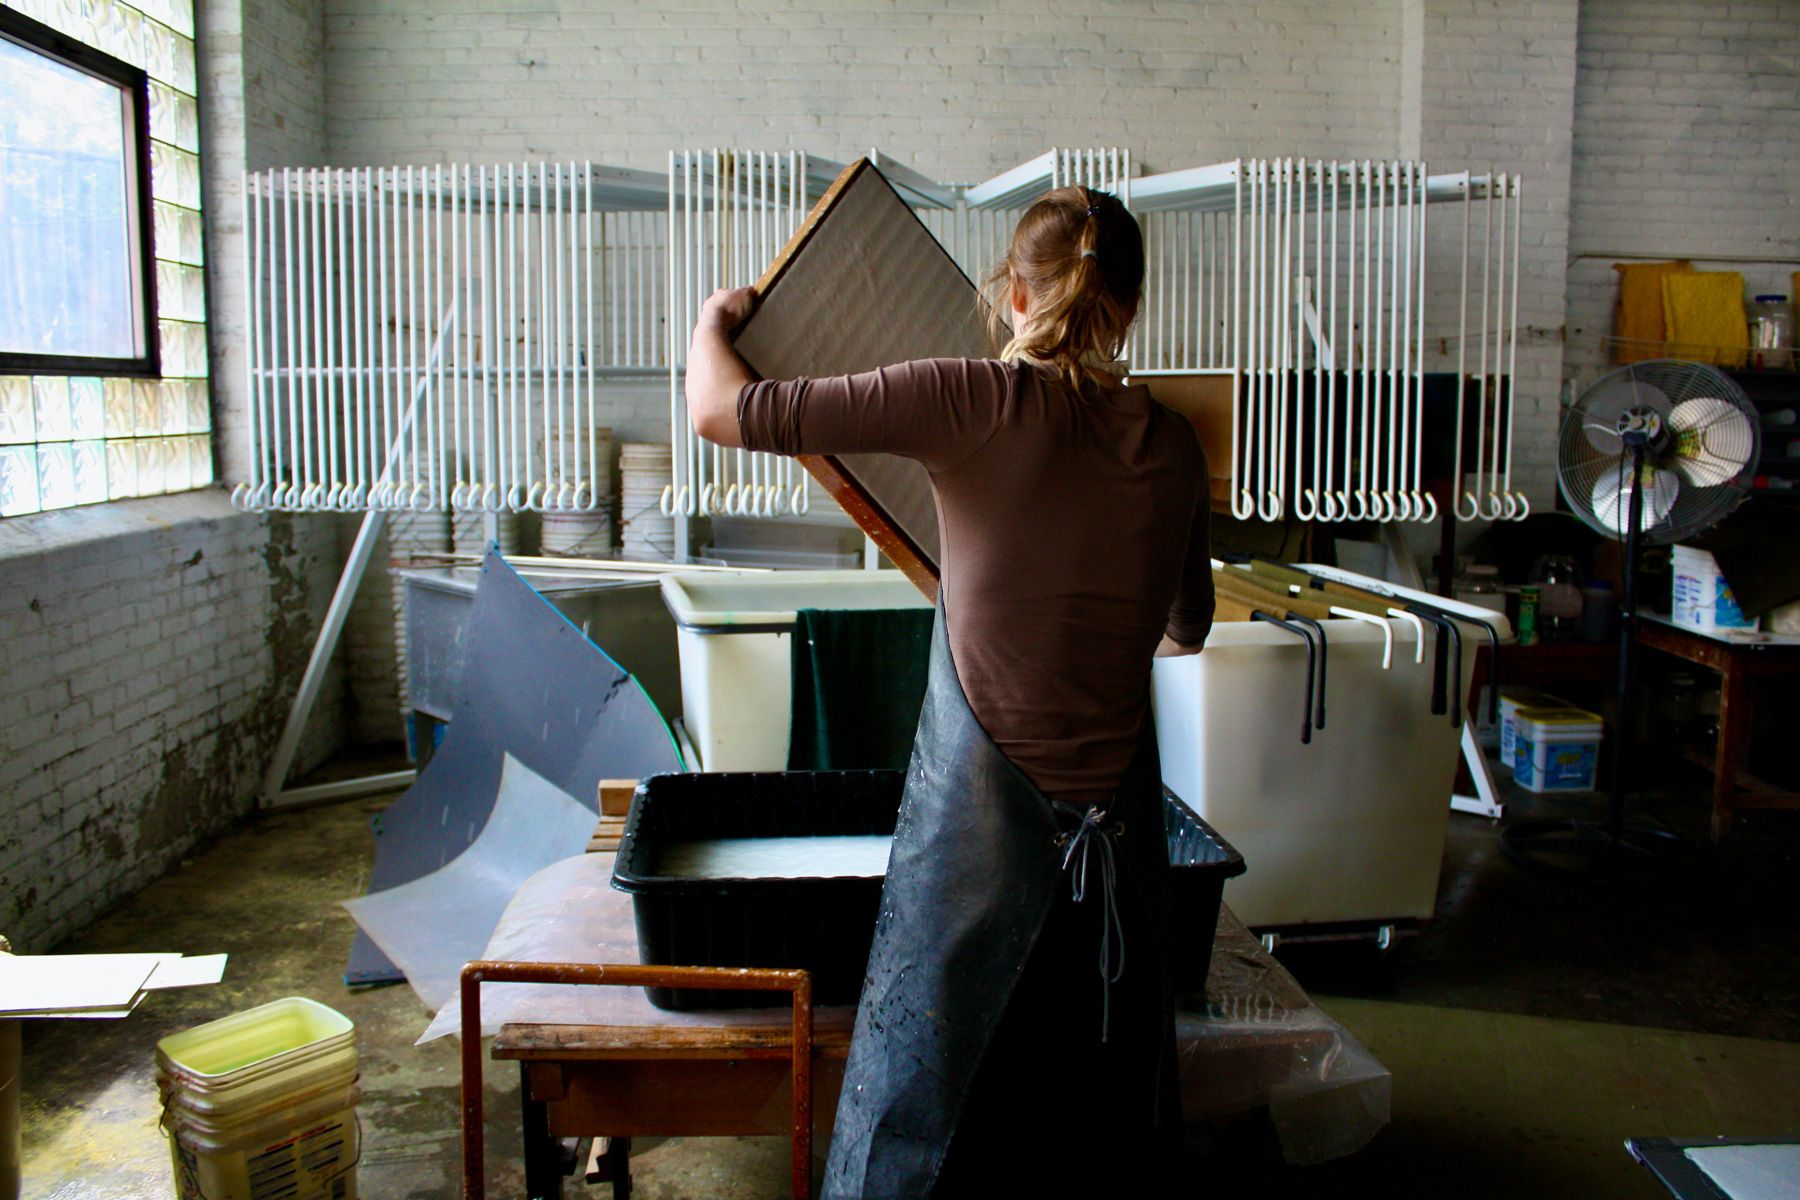 Textile worker from Cleveland, Ohio in her studio